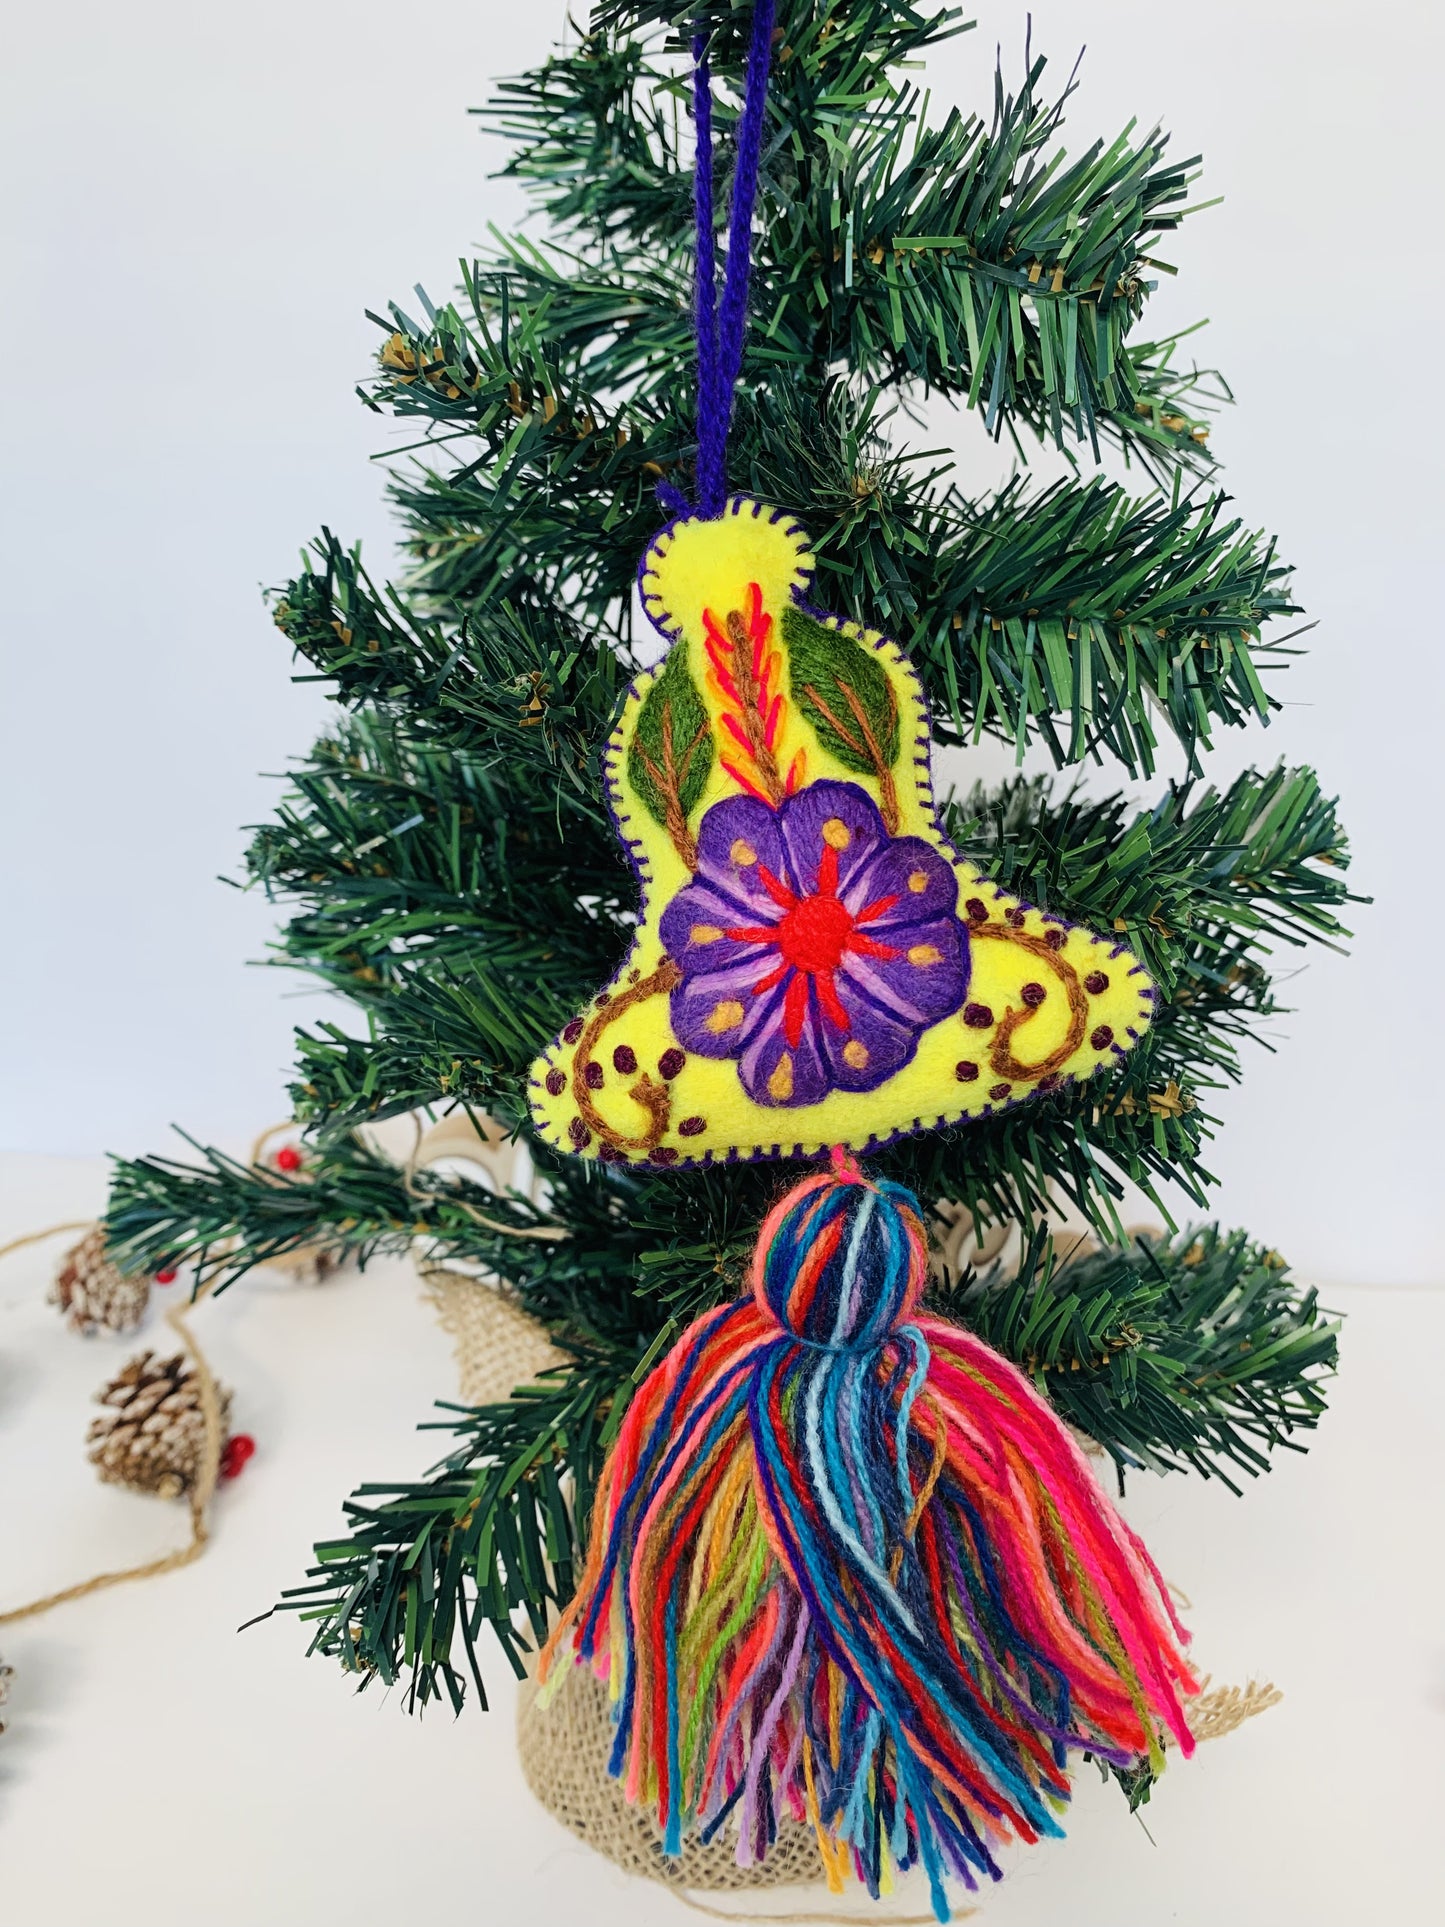 Embroidered wool Holiday ornament